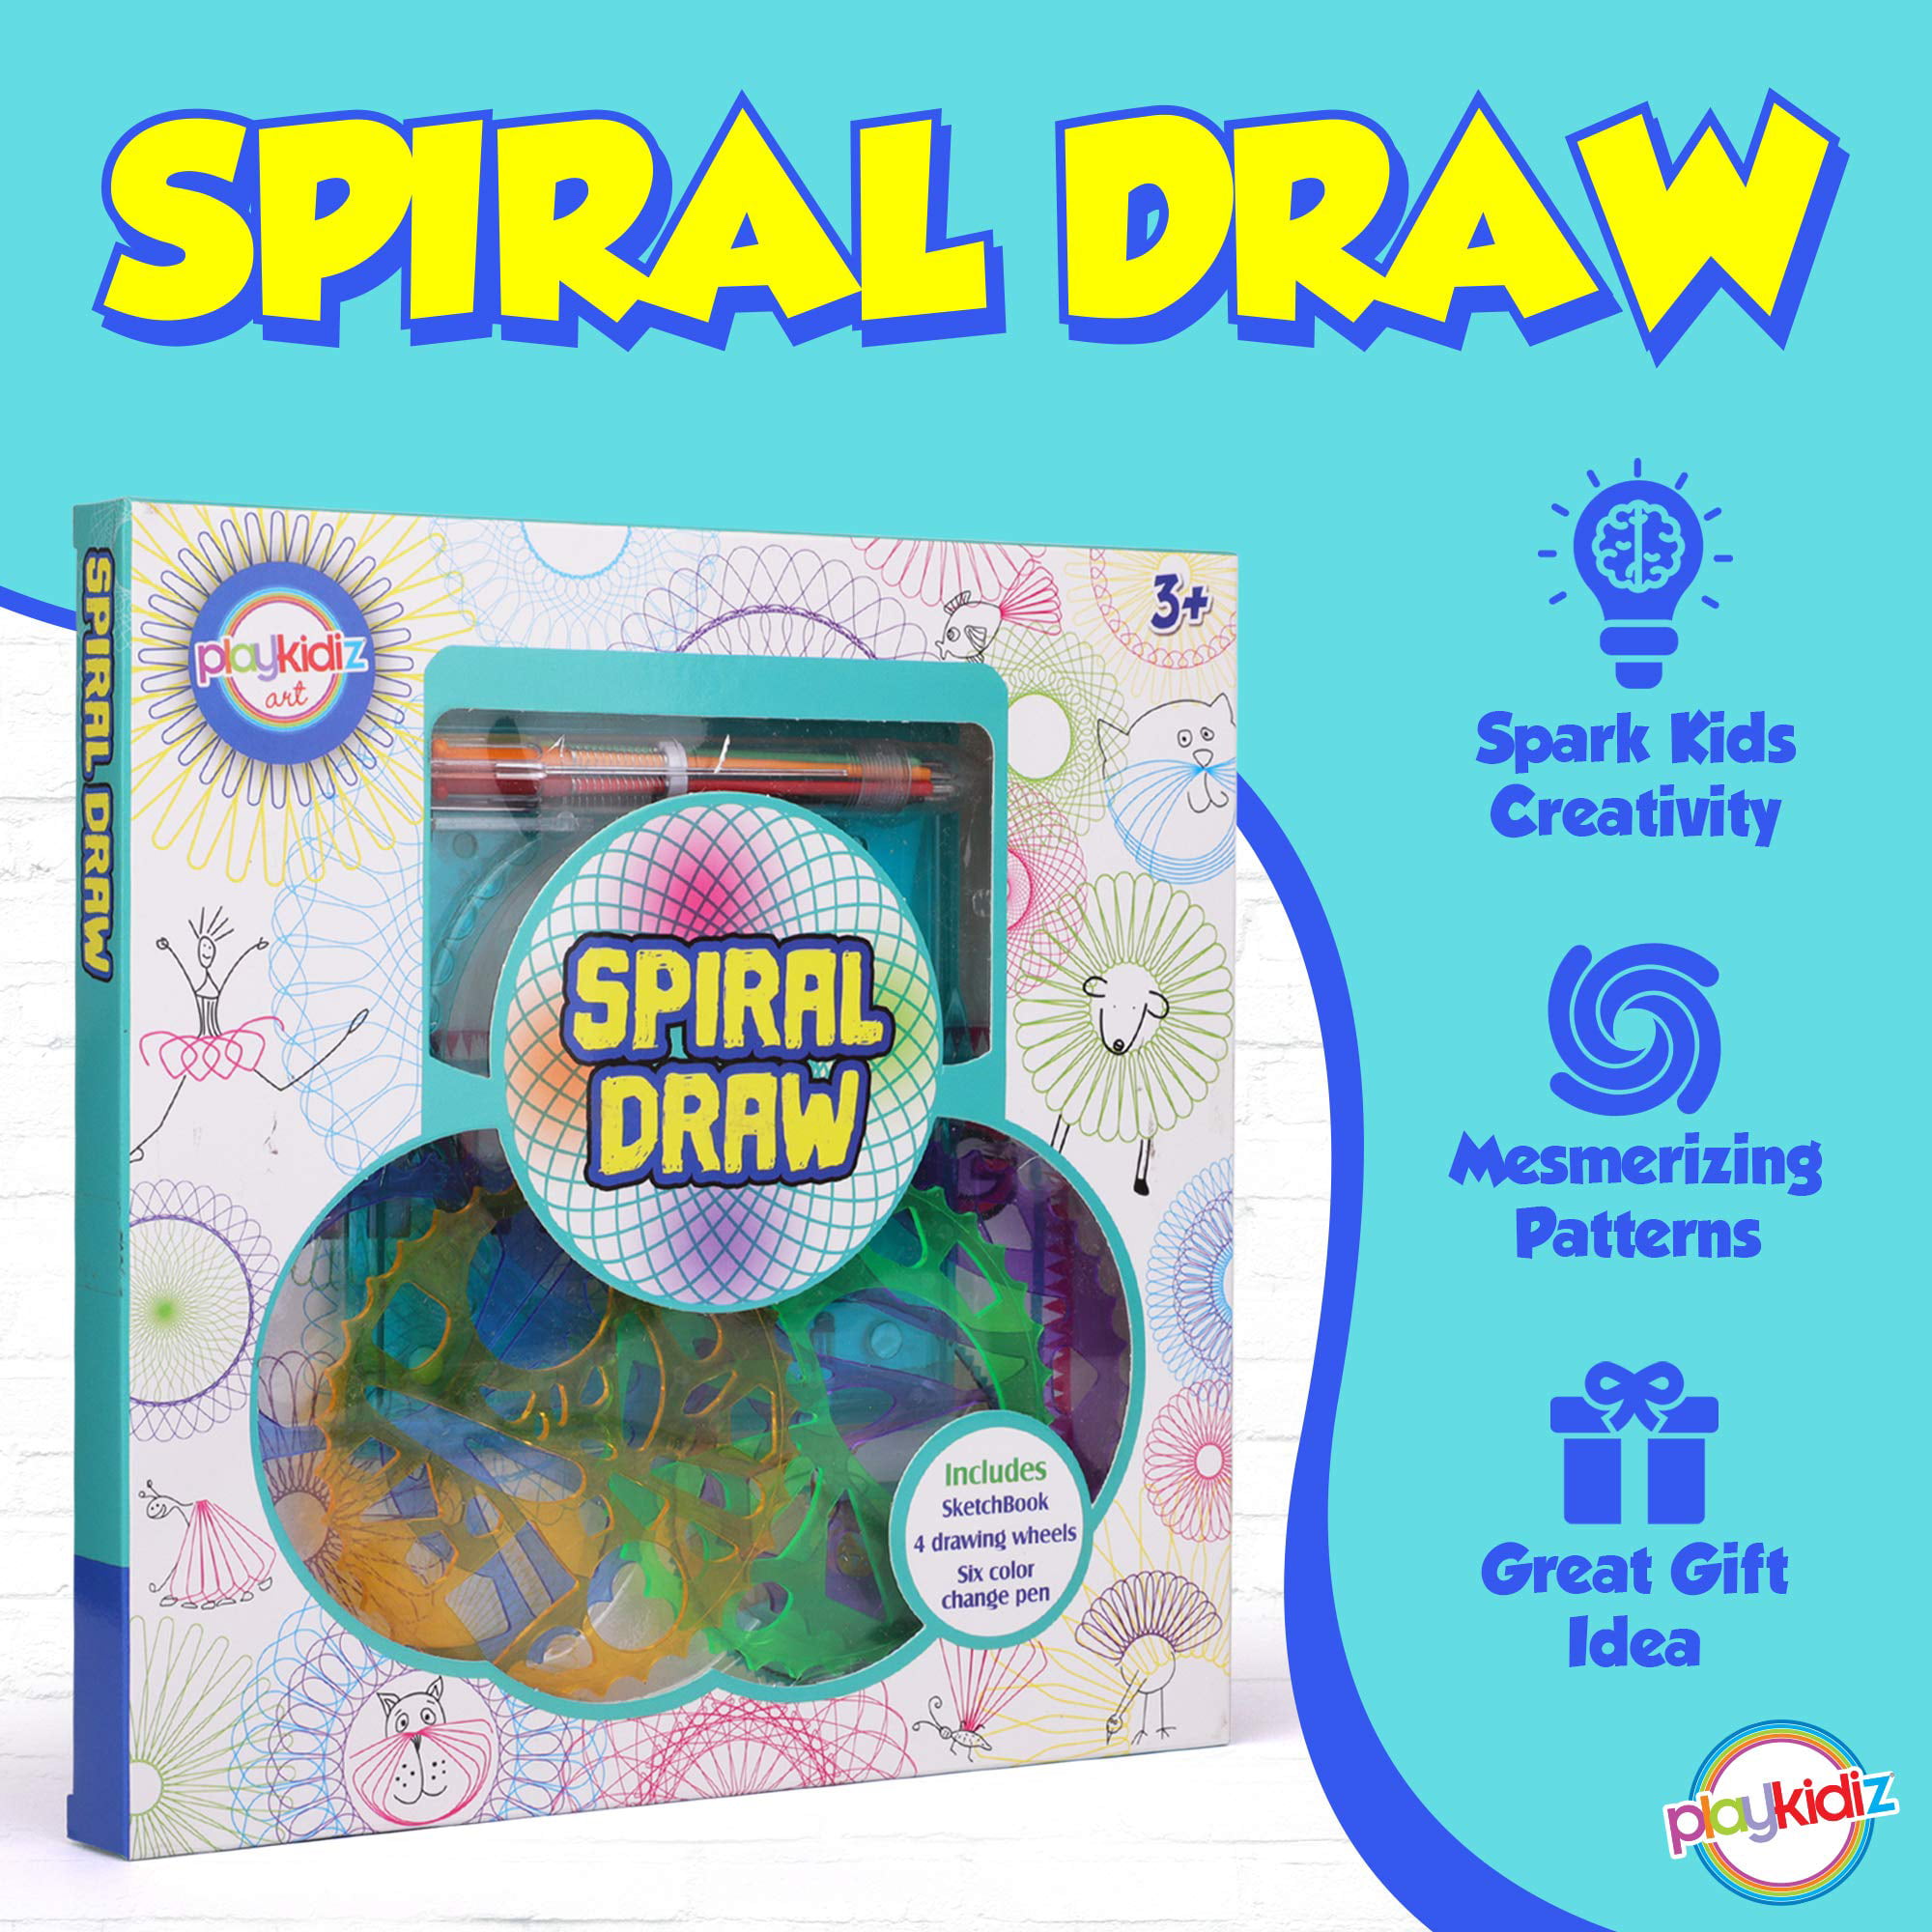 Playkidz Art Spiral Draw Set for Kids - 7 Pcs Arts and Craft Kit, Includes  6-in-1 Color Pen, 4 Drawing Templates and Sketch Pad - Unique Drawing  Supplies - Great Gift for